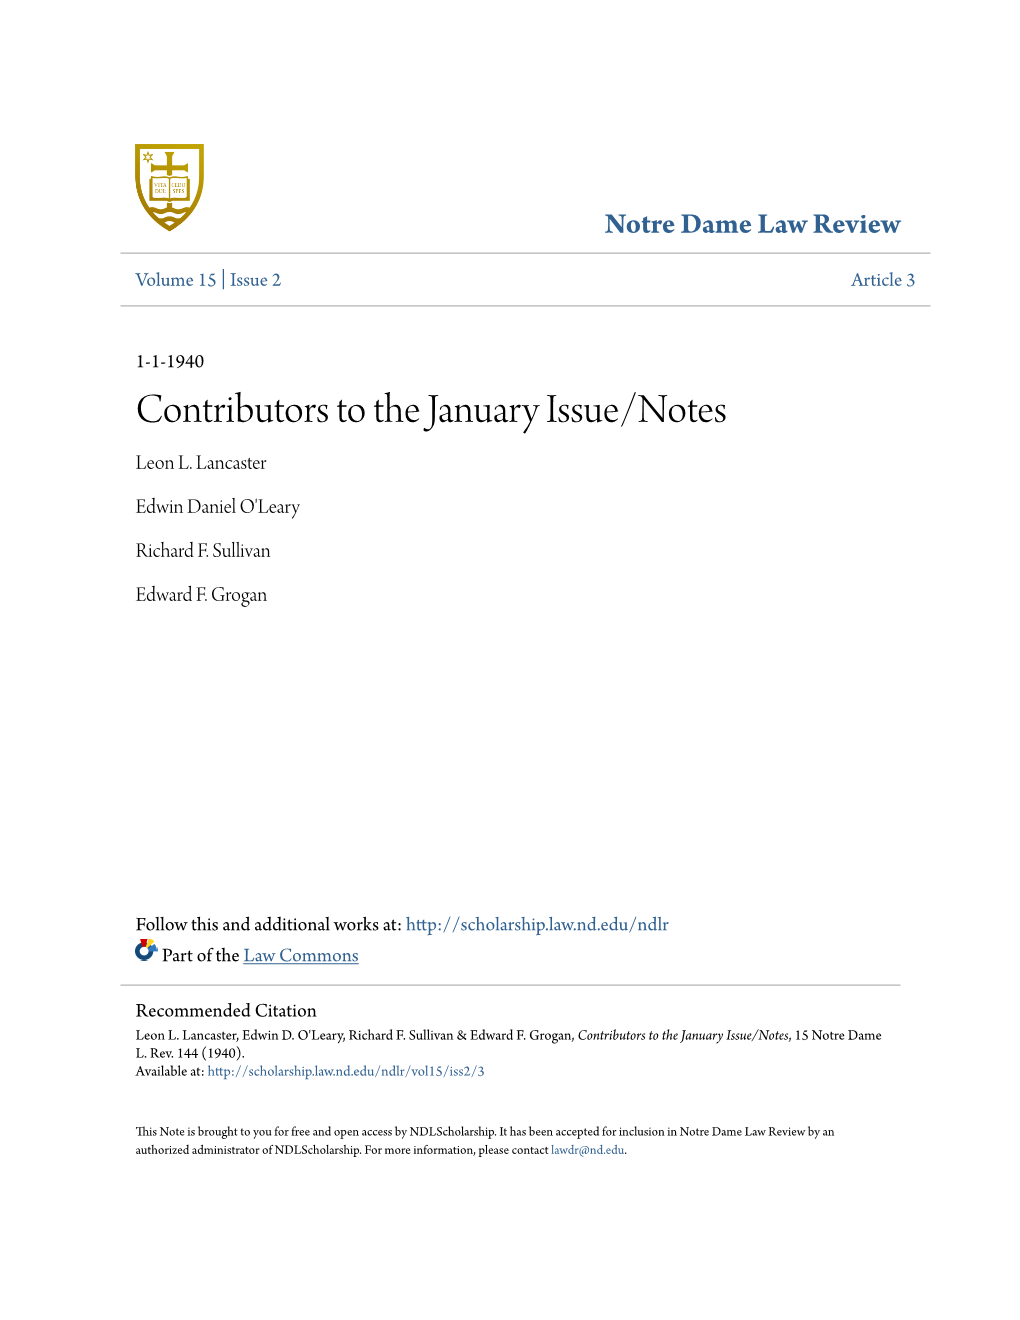 Contributors to the January Issue/Notes Leon L